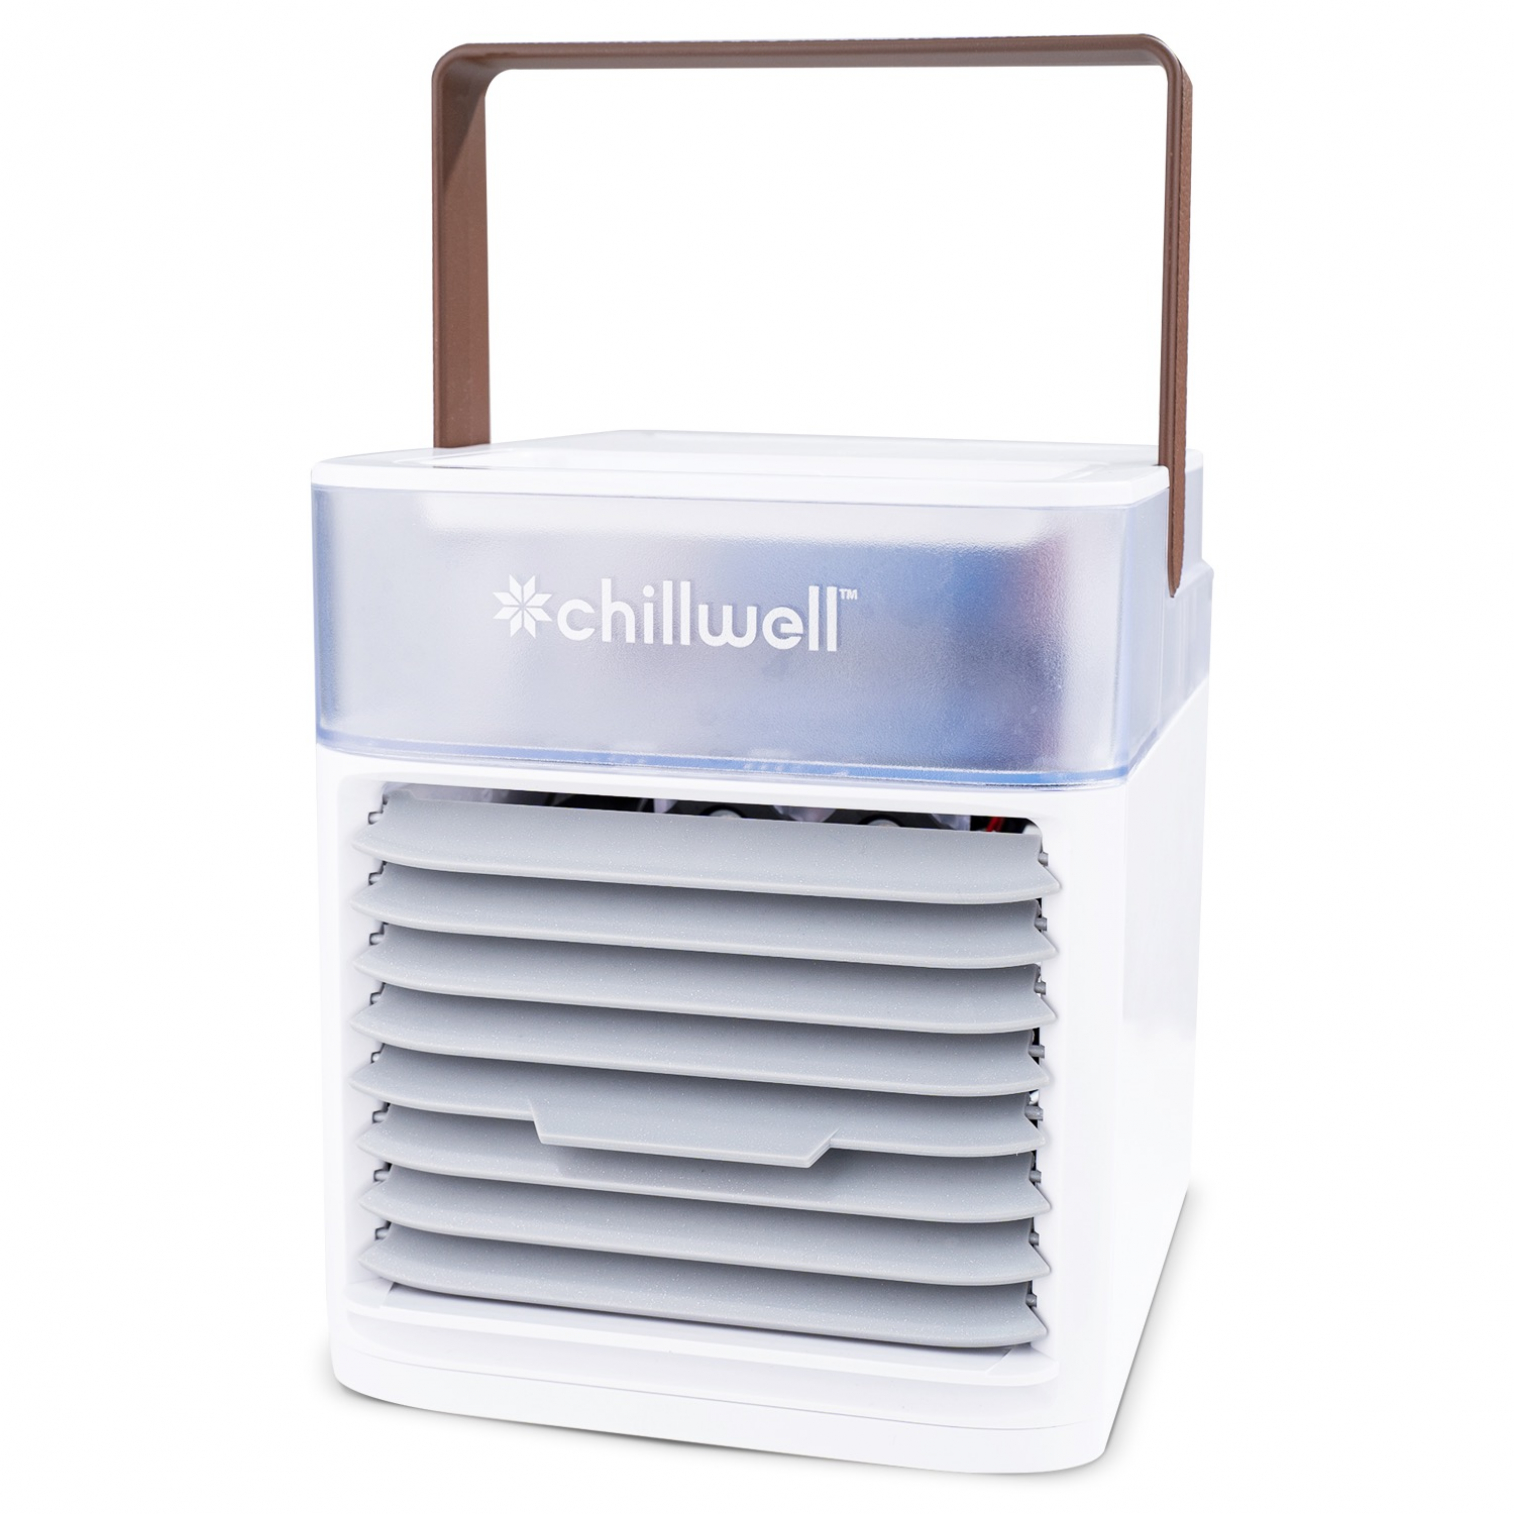 Chillwell Ac Personal Portable Air Cooler